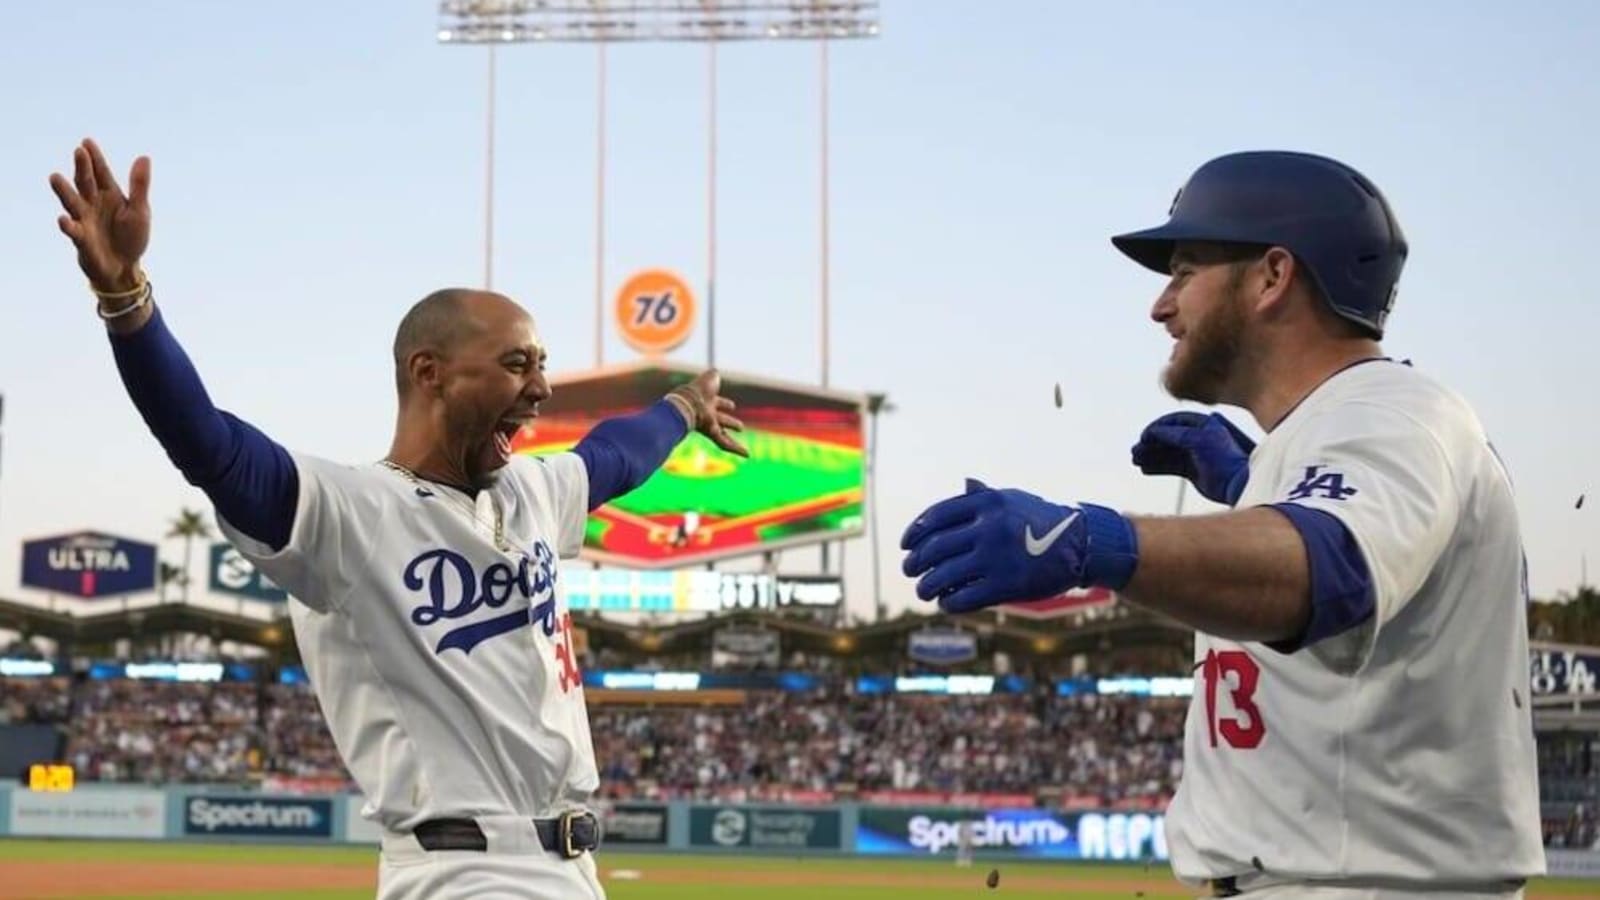 Max Muncy: Dodgers’ Last Two Weeks Have Been ‘Pretty Special’